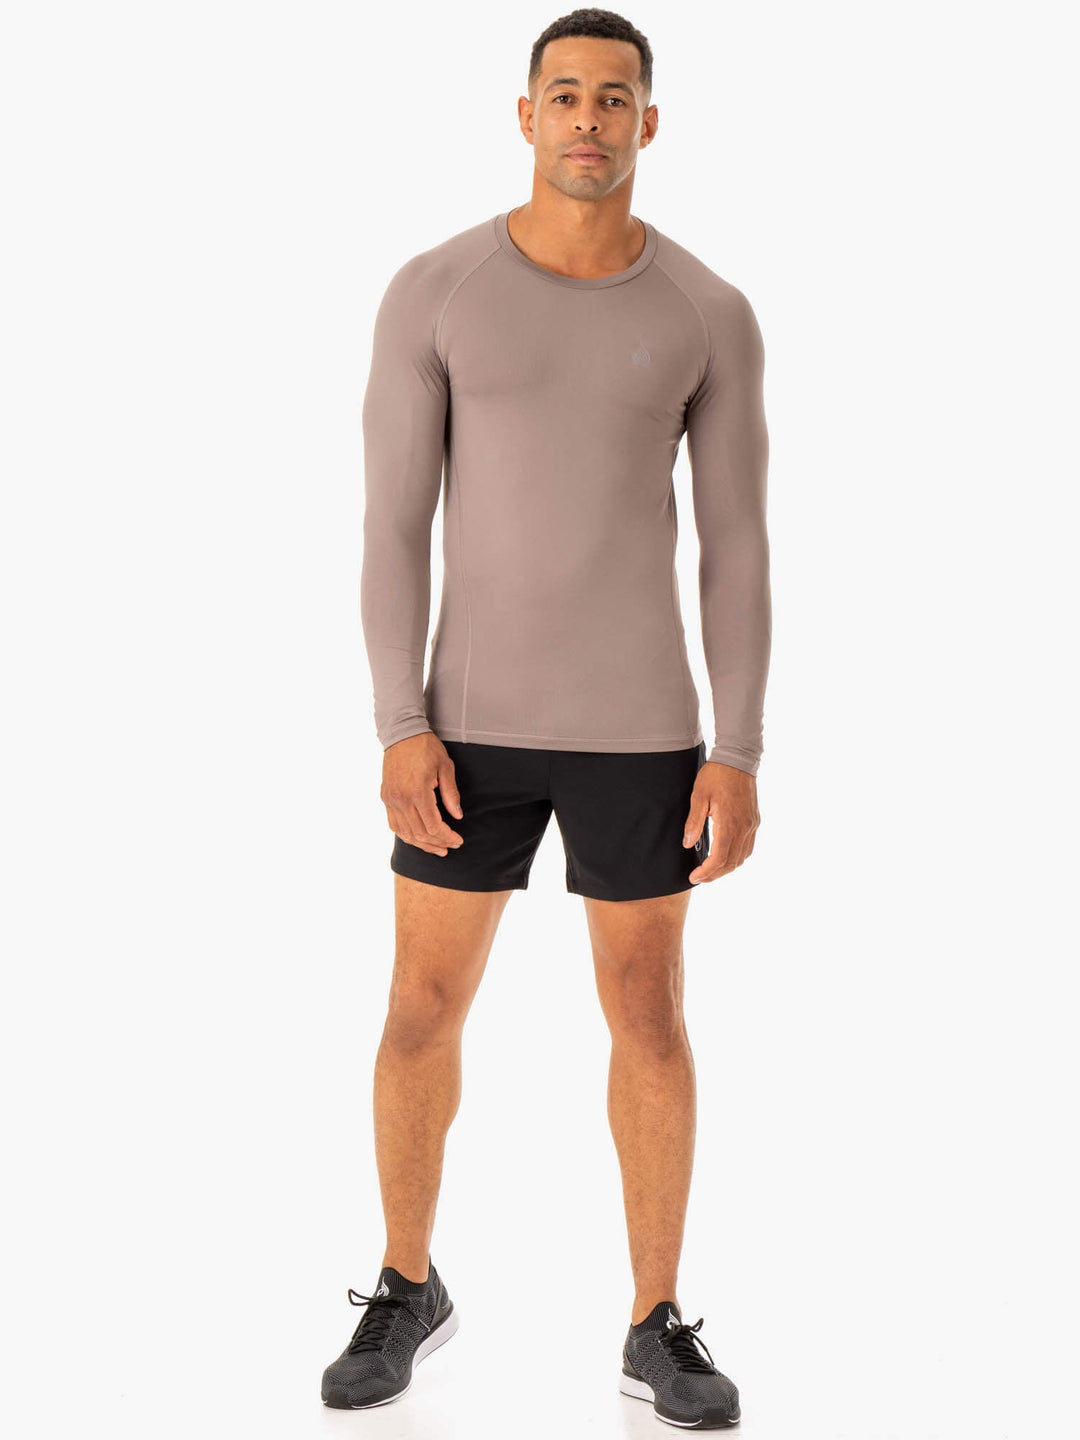 Division Base Layer Long Sleeve - Taupe Clothing Ryderwear 